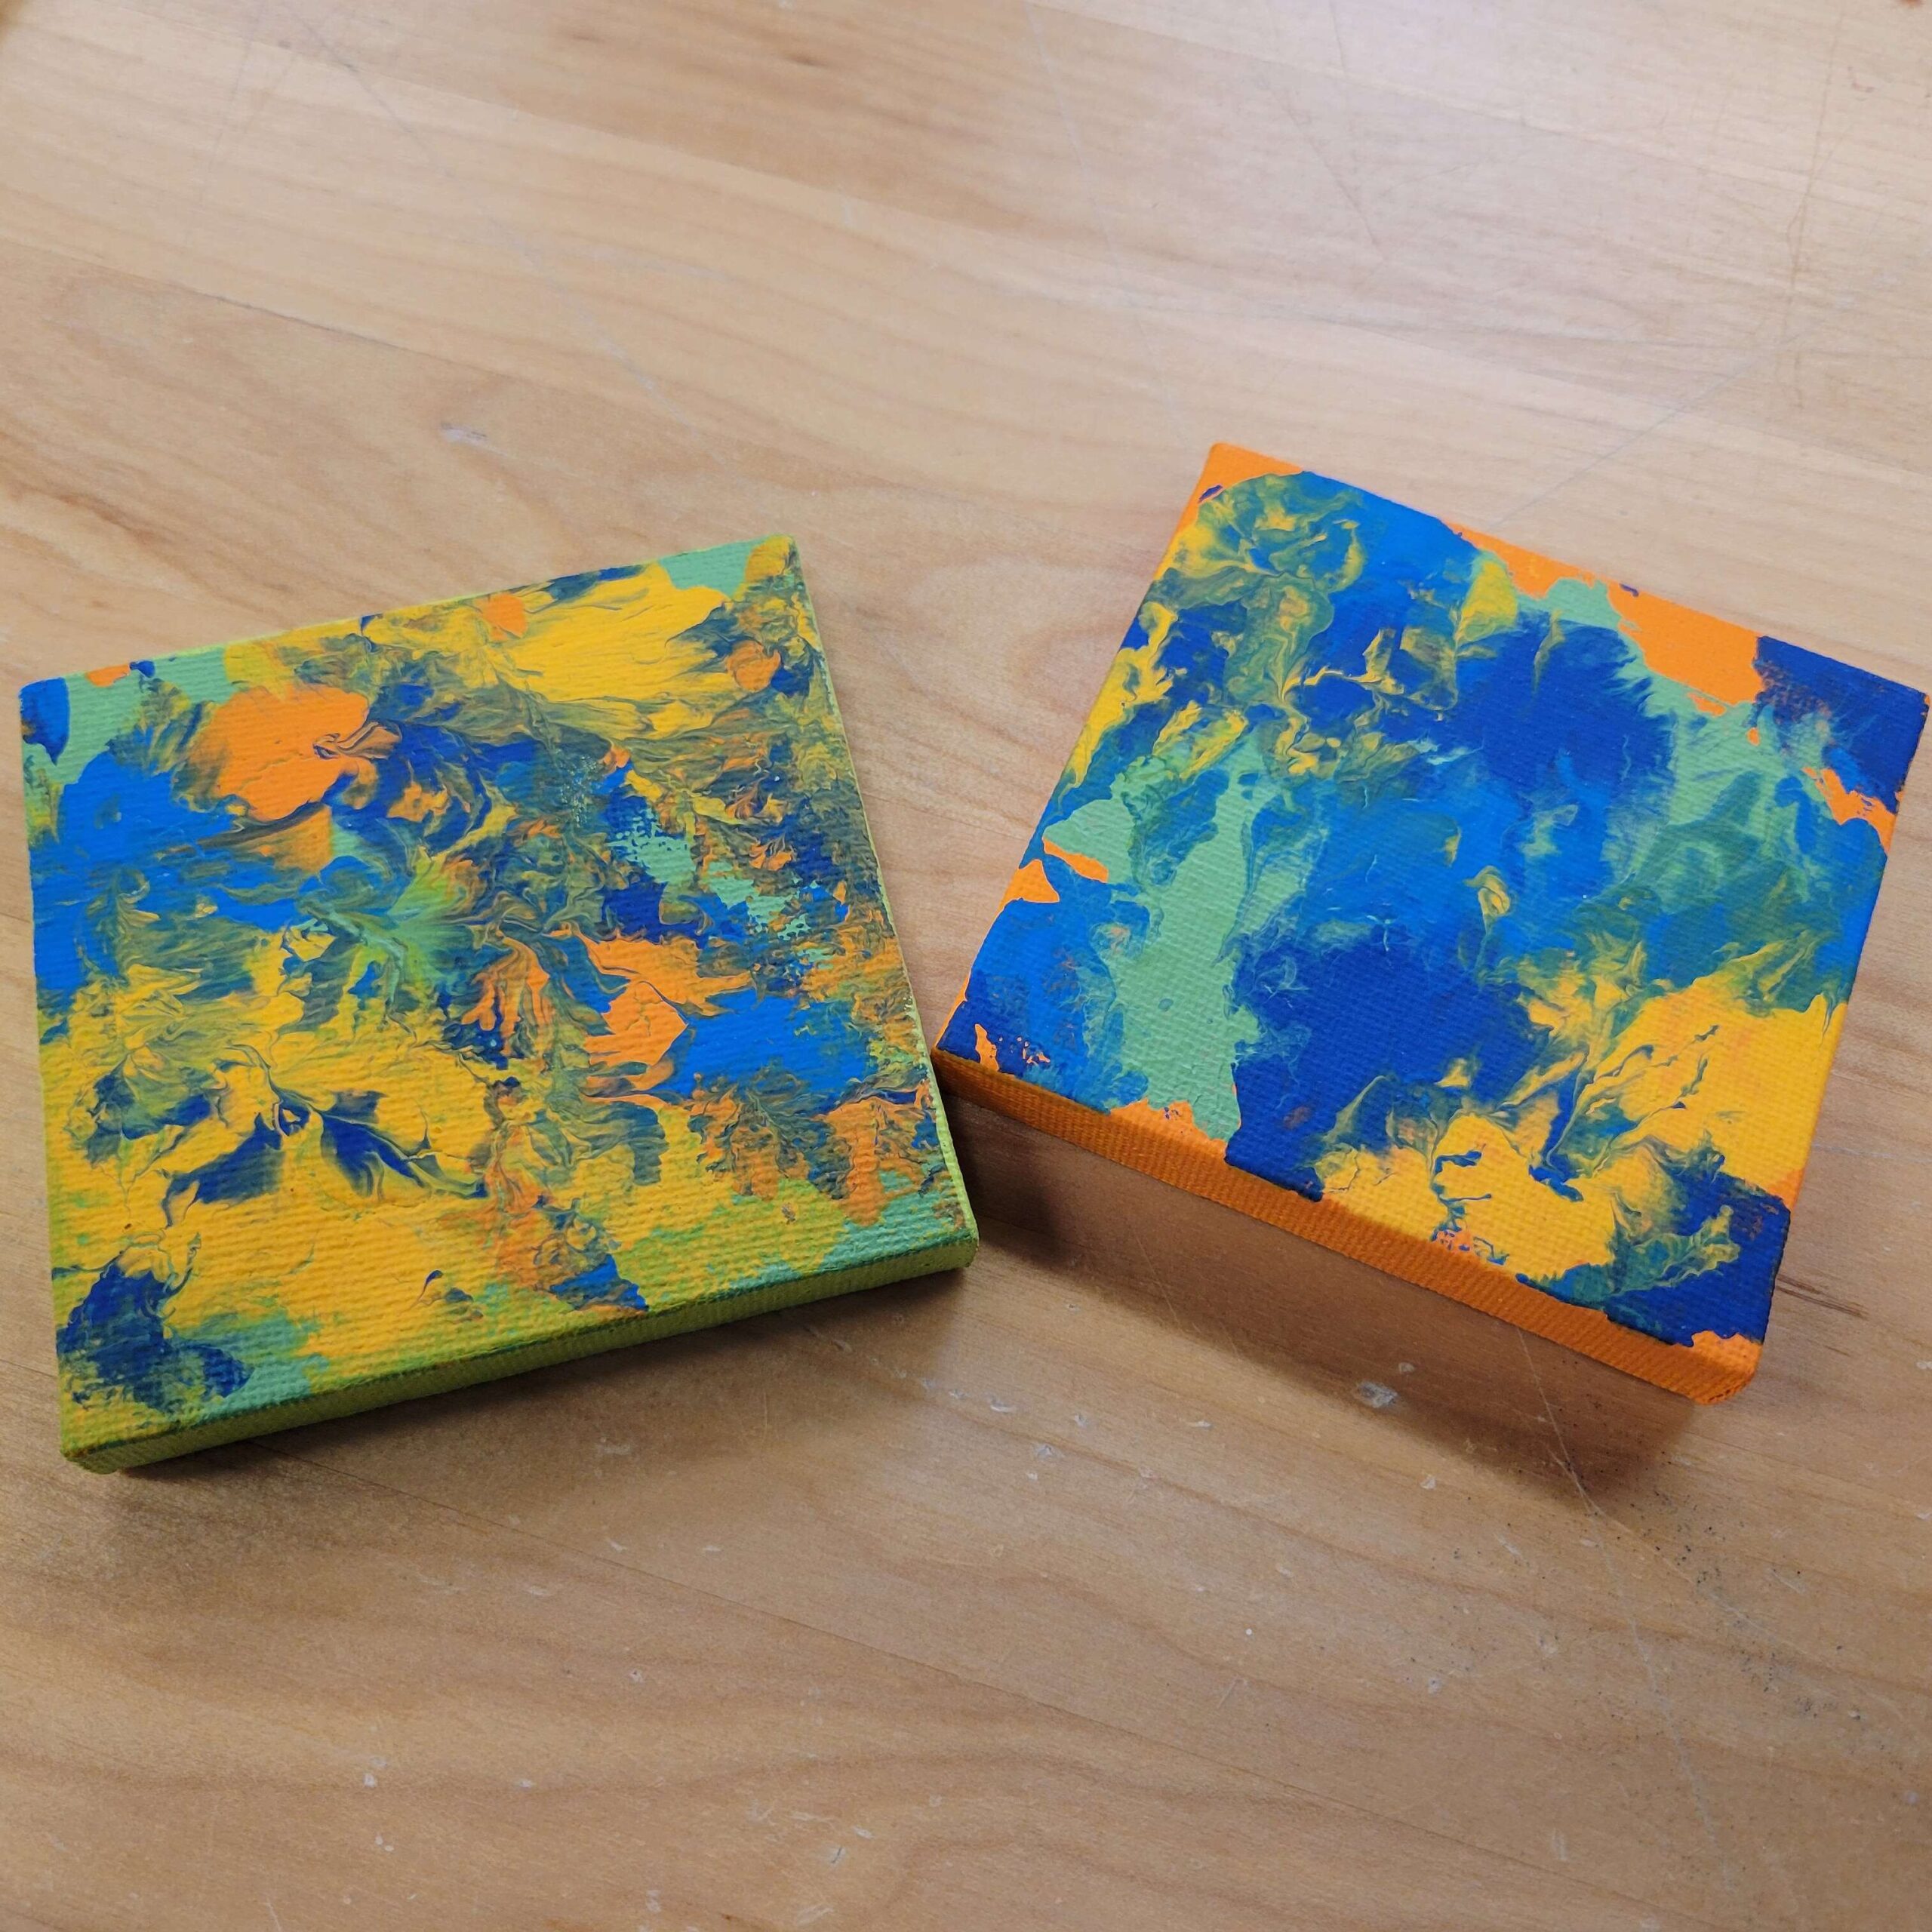 two small square canvases with blue, yellow, green, and blue paint splattered on them to make abstract patterns